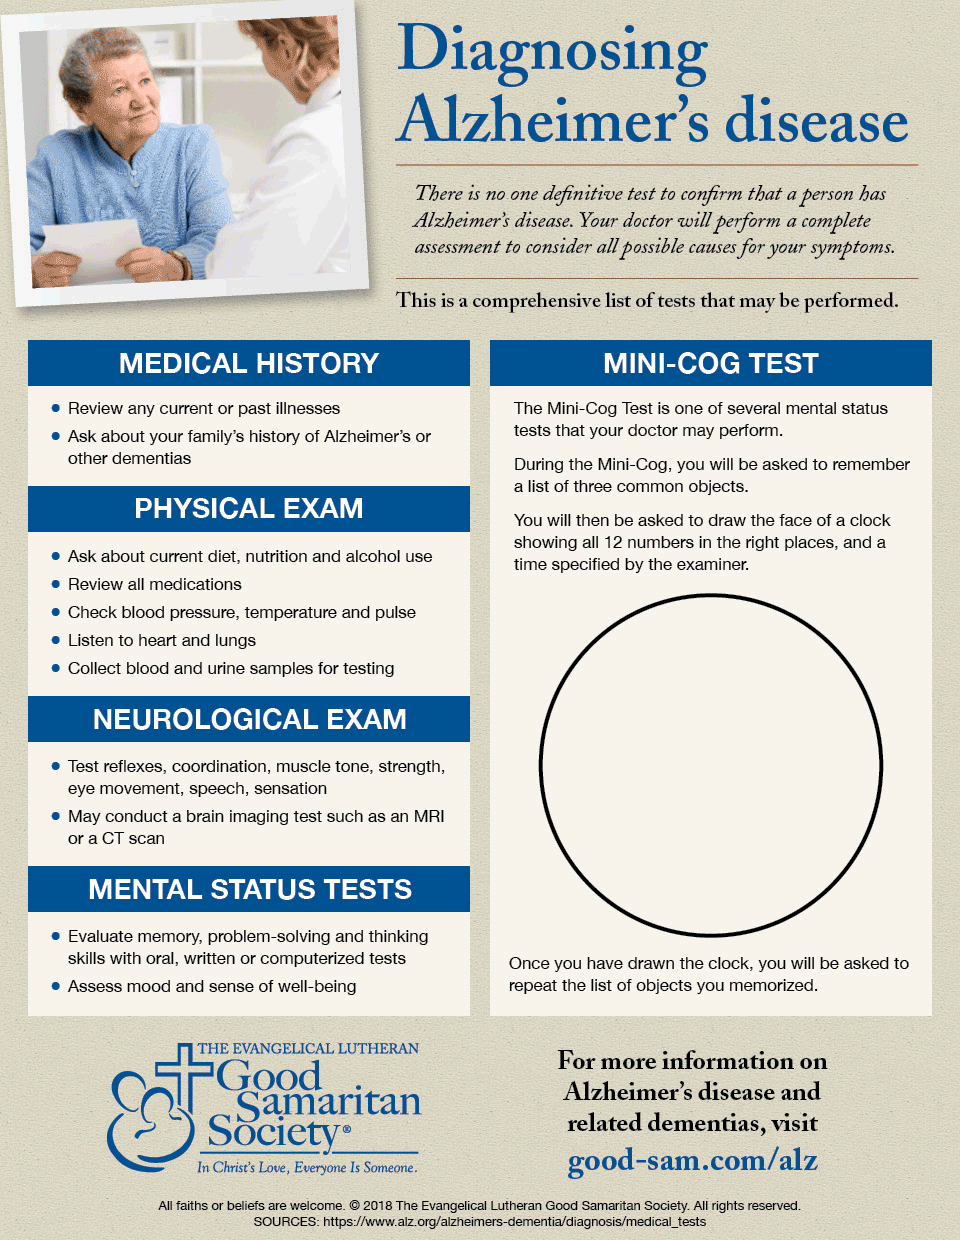 Animated infographic titled "diagnosing alzheimer's disease" lists the types of information your physician may gather in order to make a diagnosis: medical history, physical exam, and a mini cognition test.